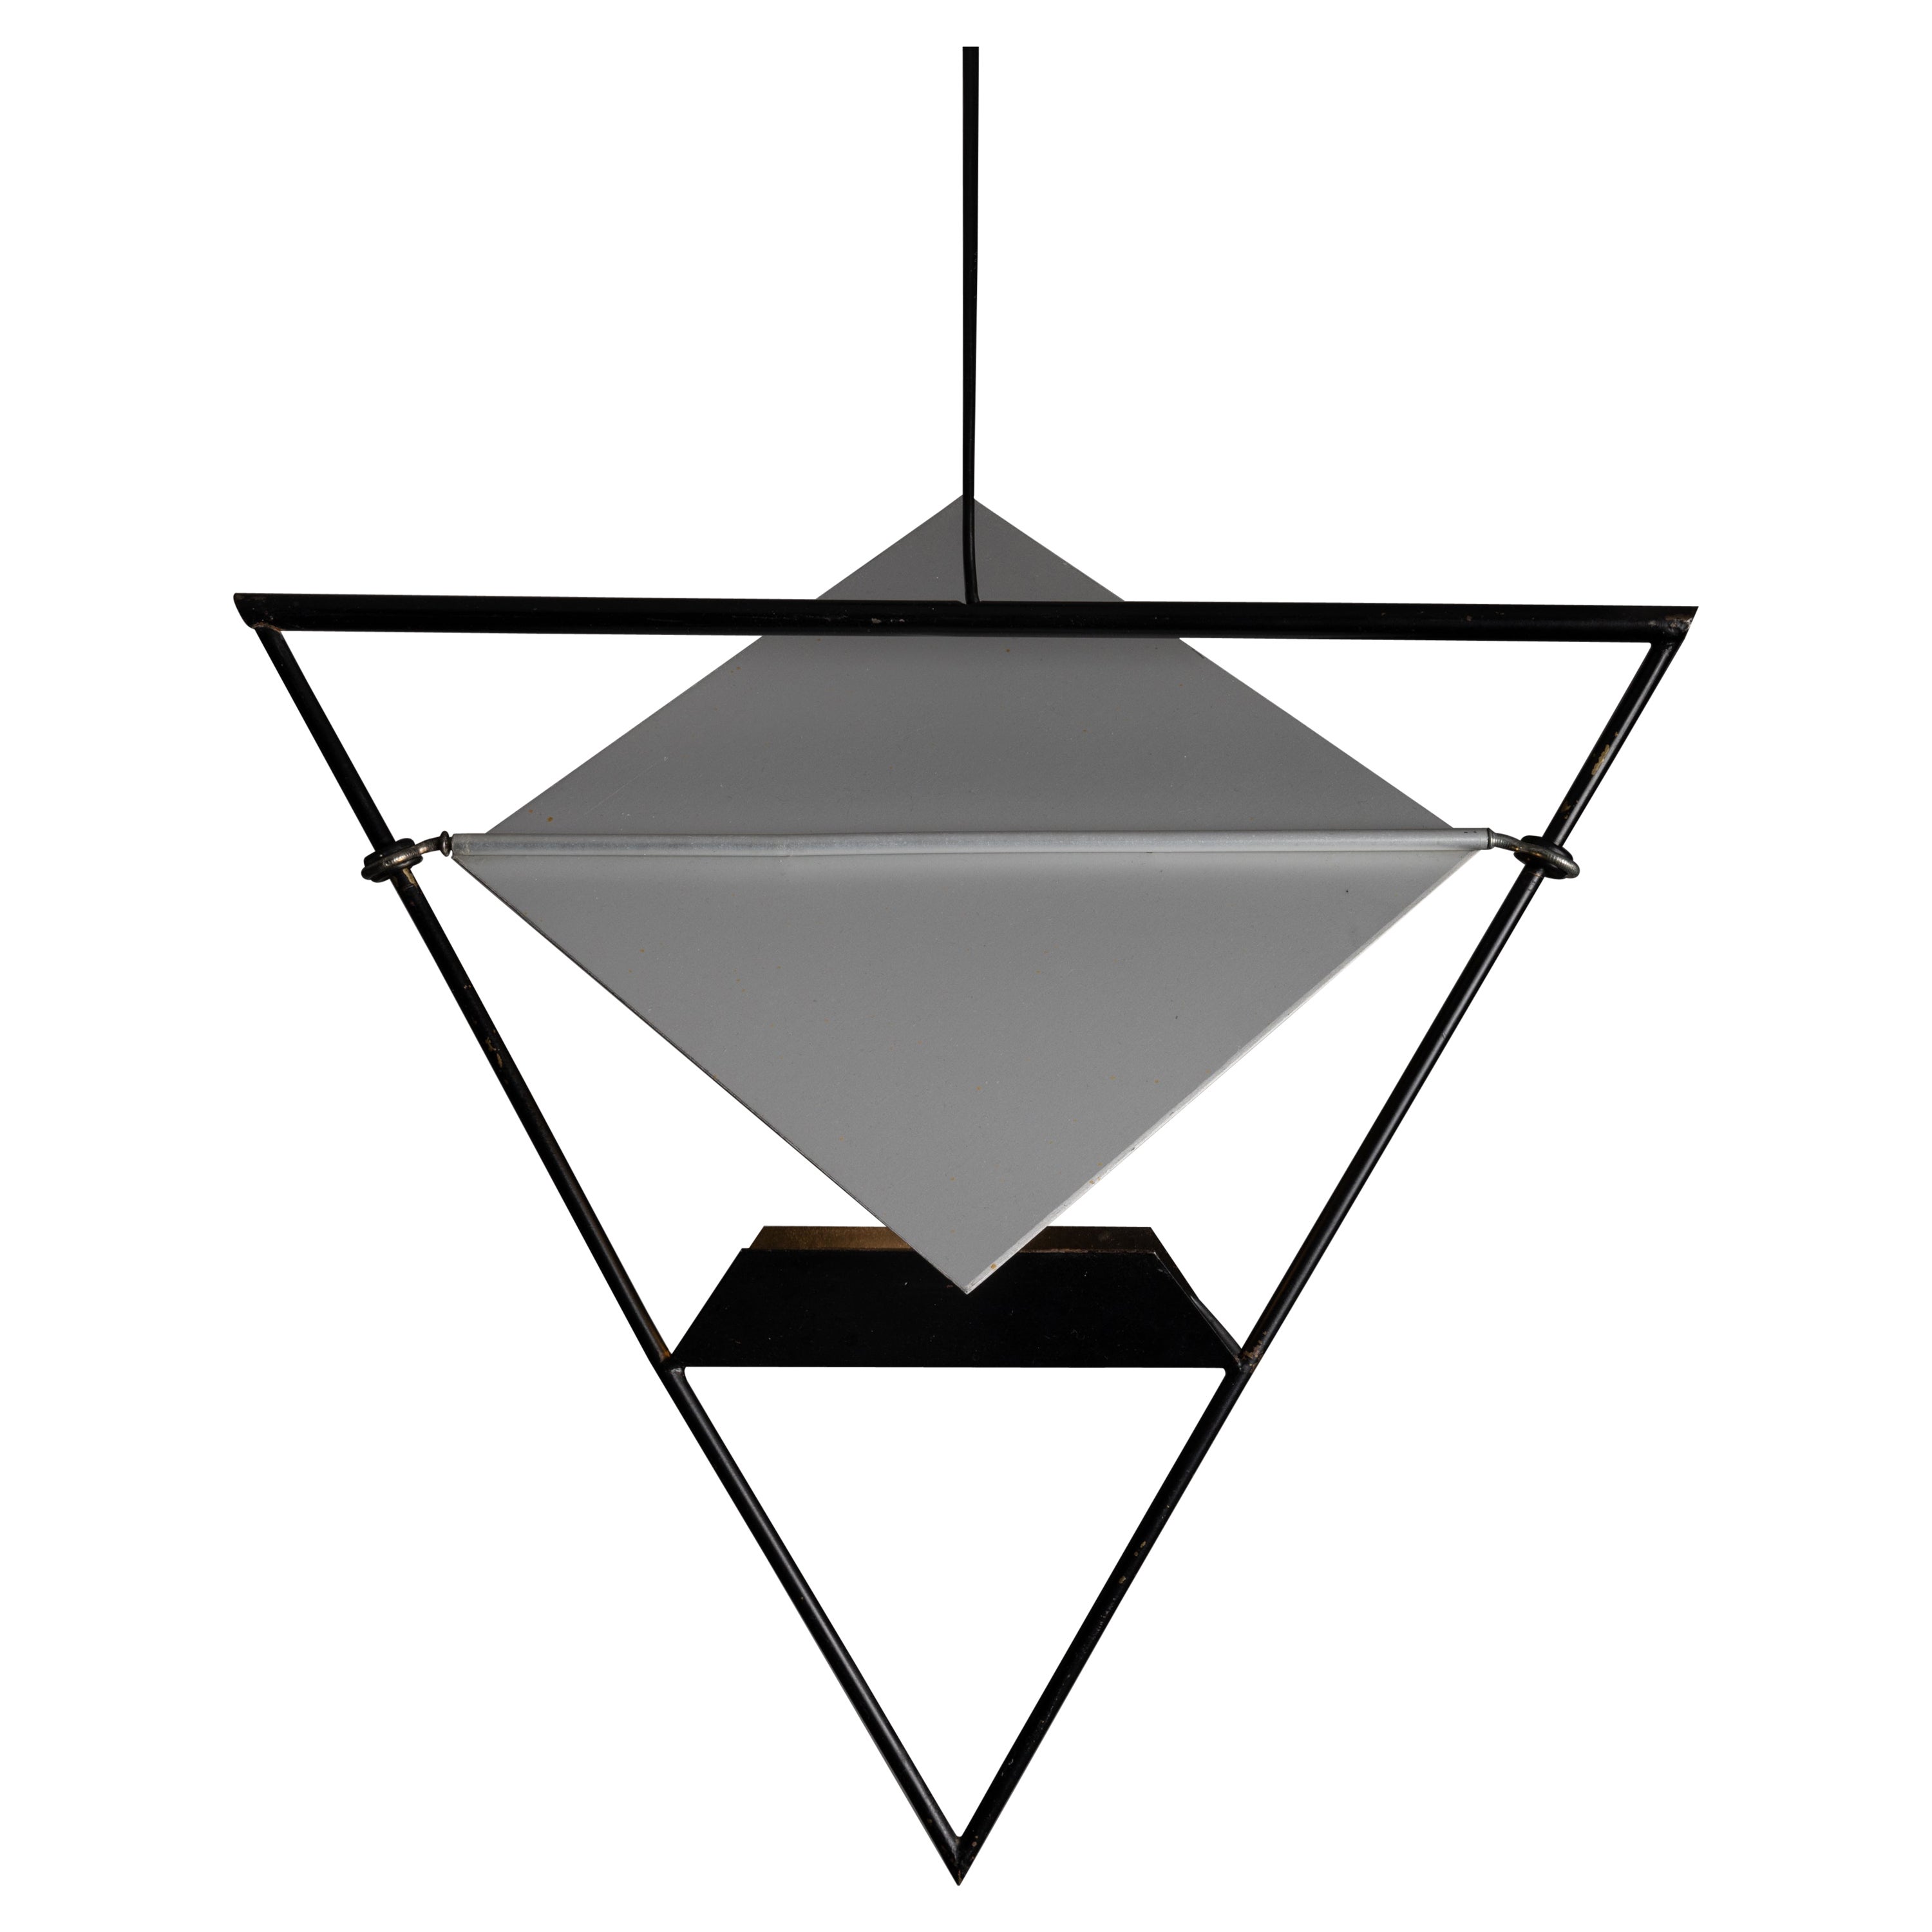 Pendants by Mario Botta for Artemide. Designed and manufactured in Italy, circa 1980. Unique, monochromatic and geometric pendants that feature an anatomical and kinetic flat shade. The frame is made from enameled steel, and is very low weight. Each